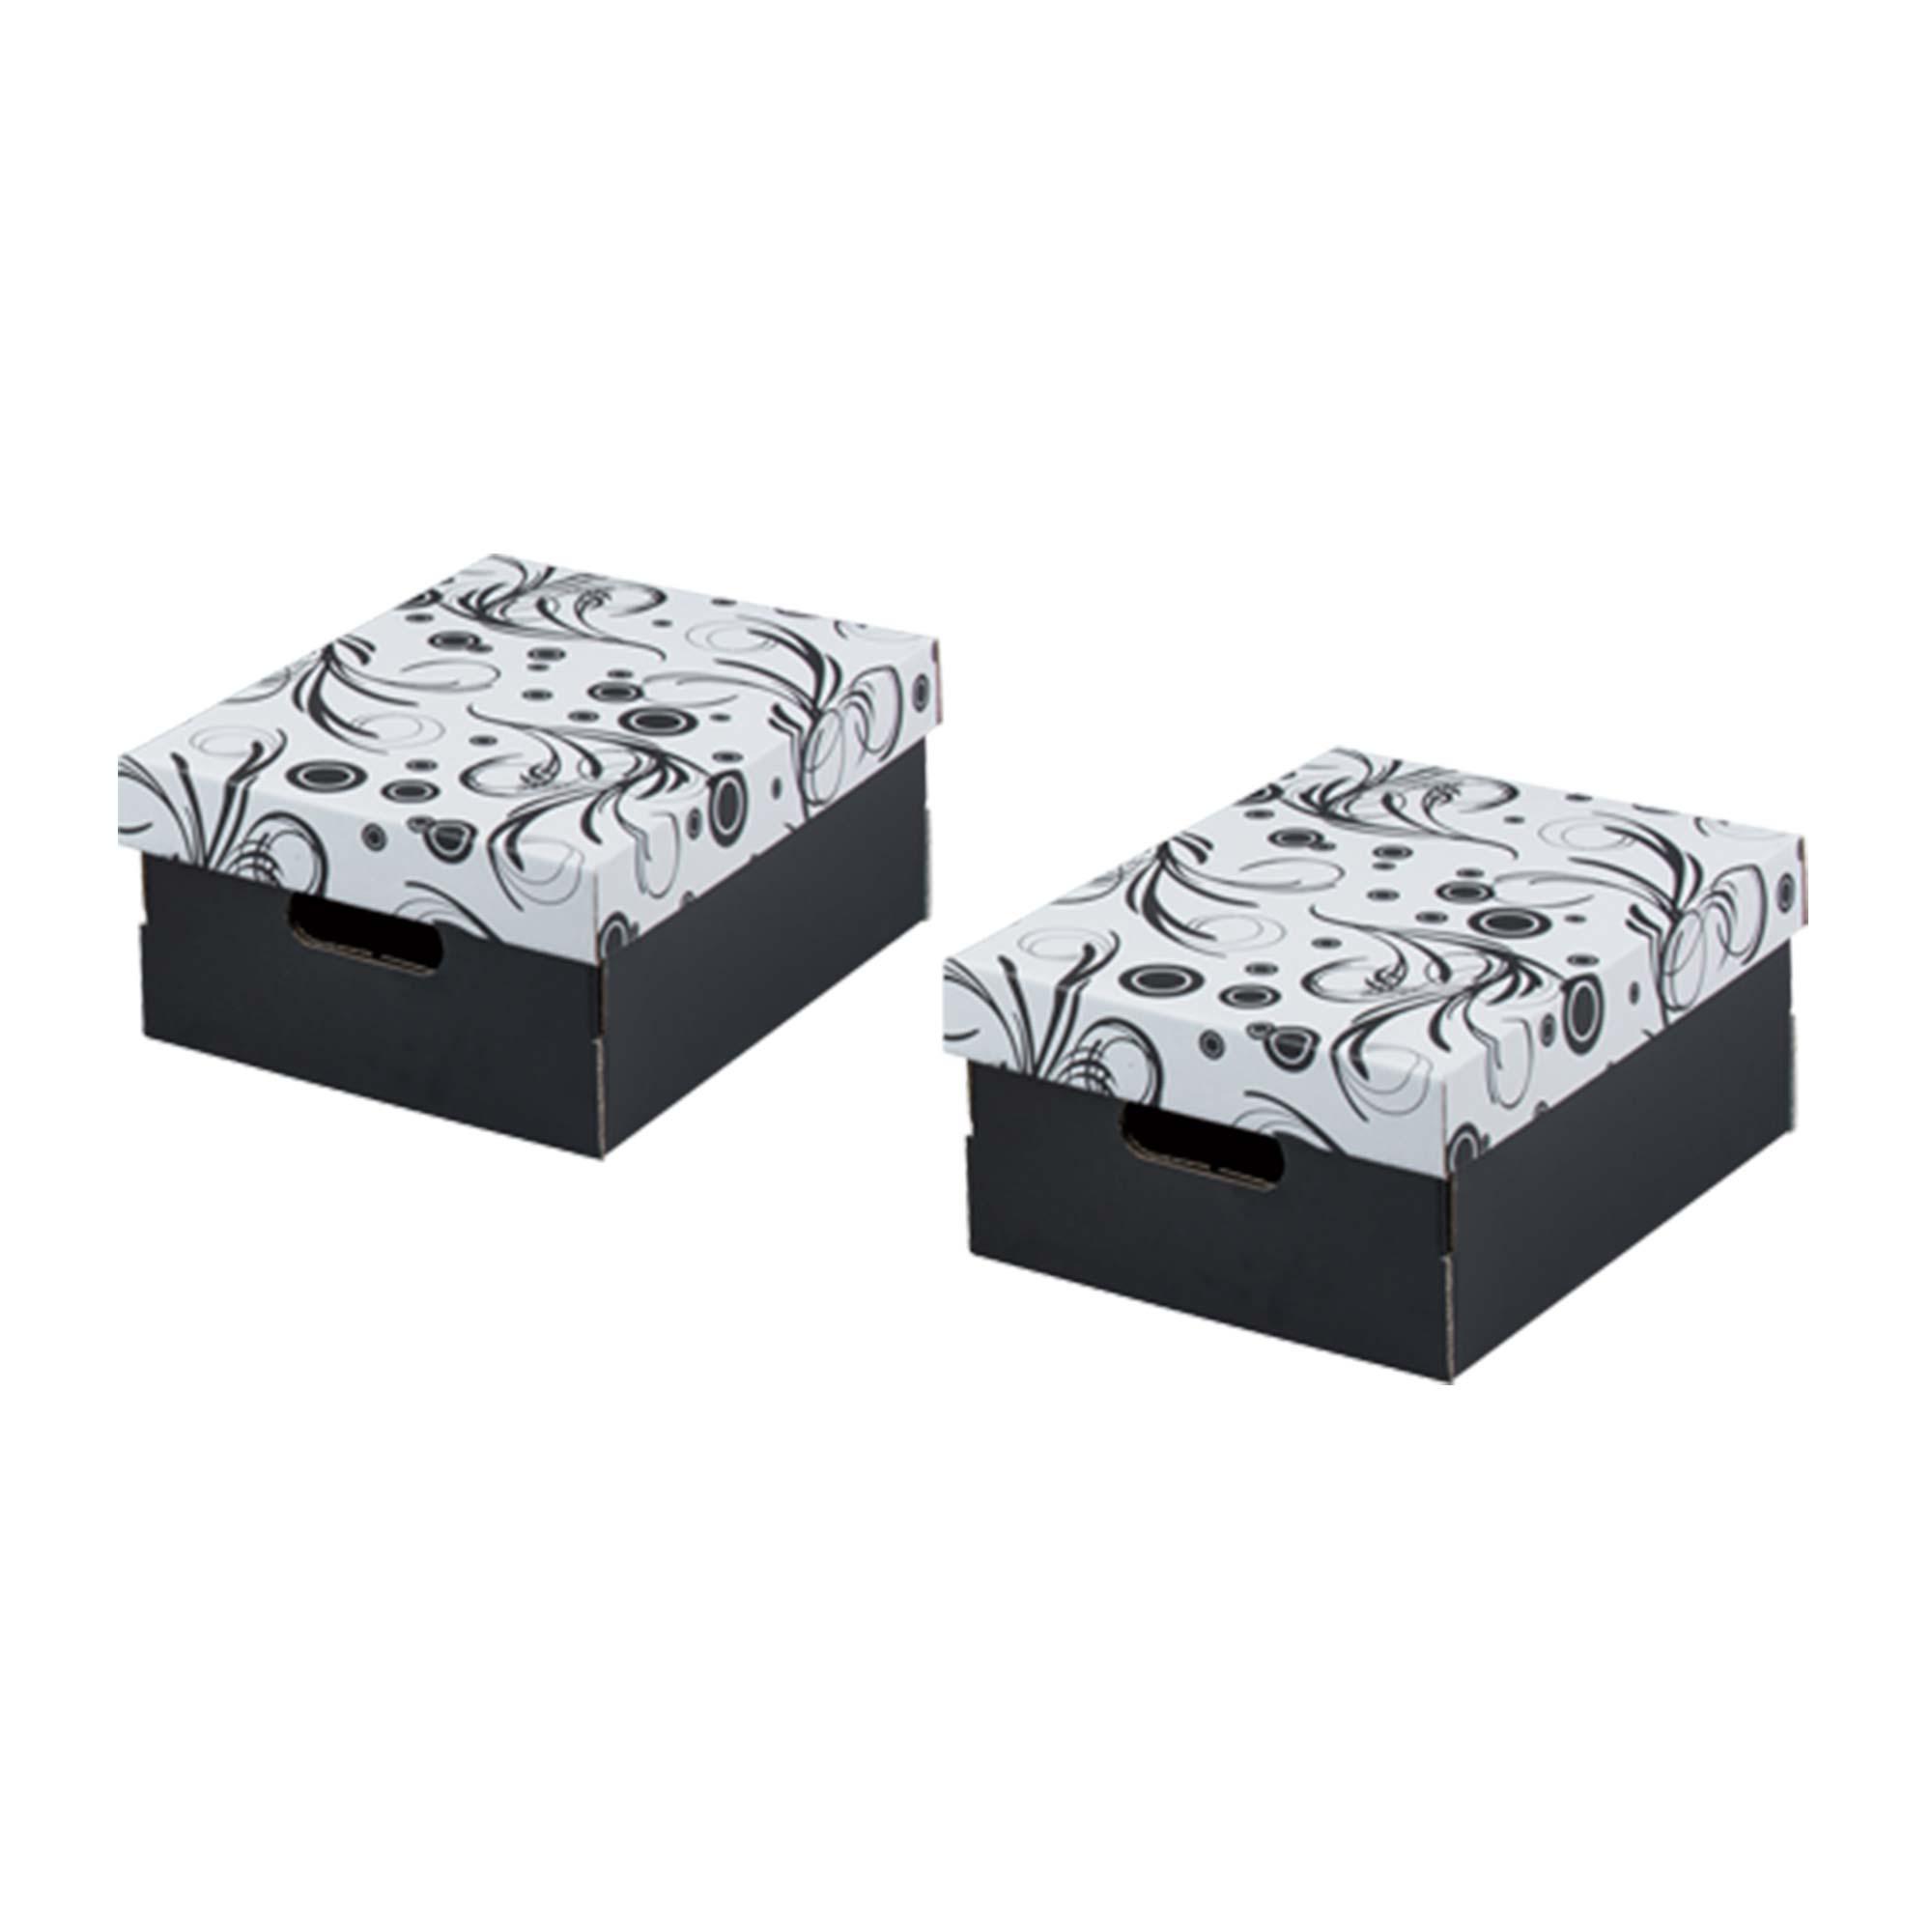 Tendri Black Boxes with Pattern lids - A4 pack of 2